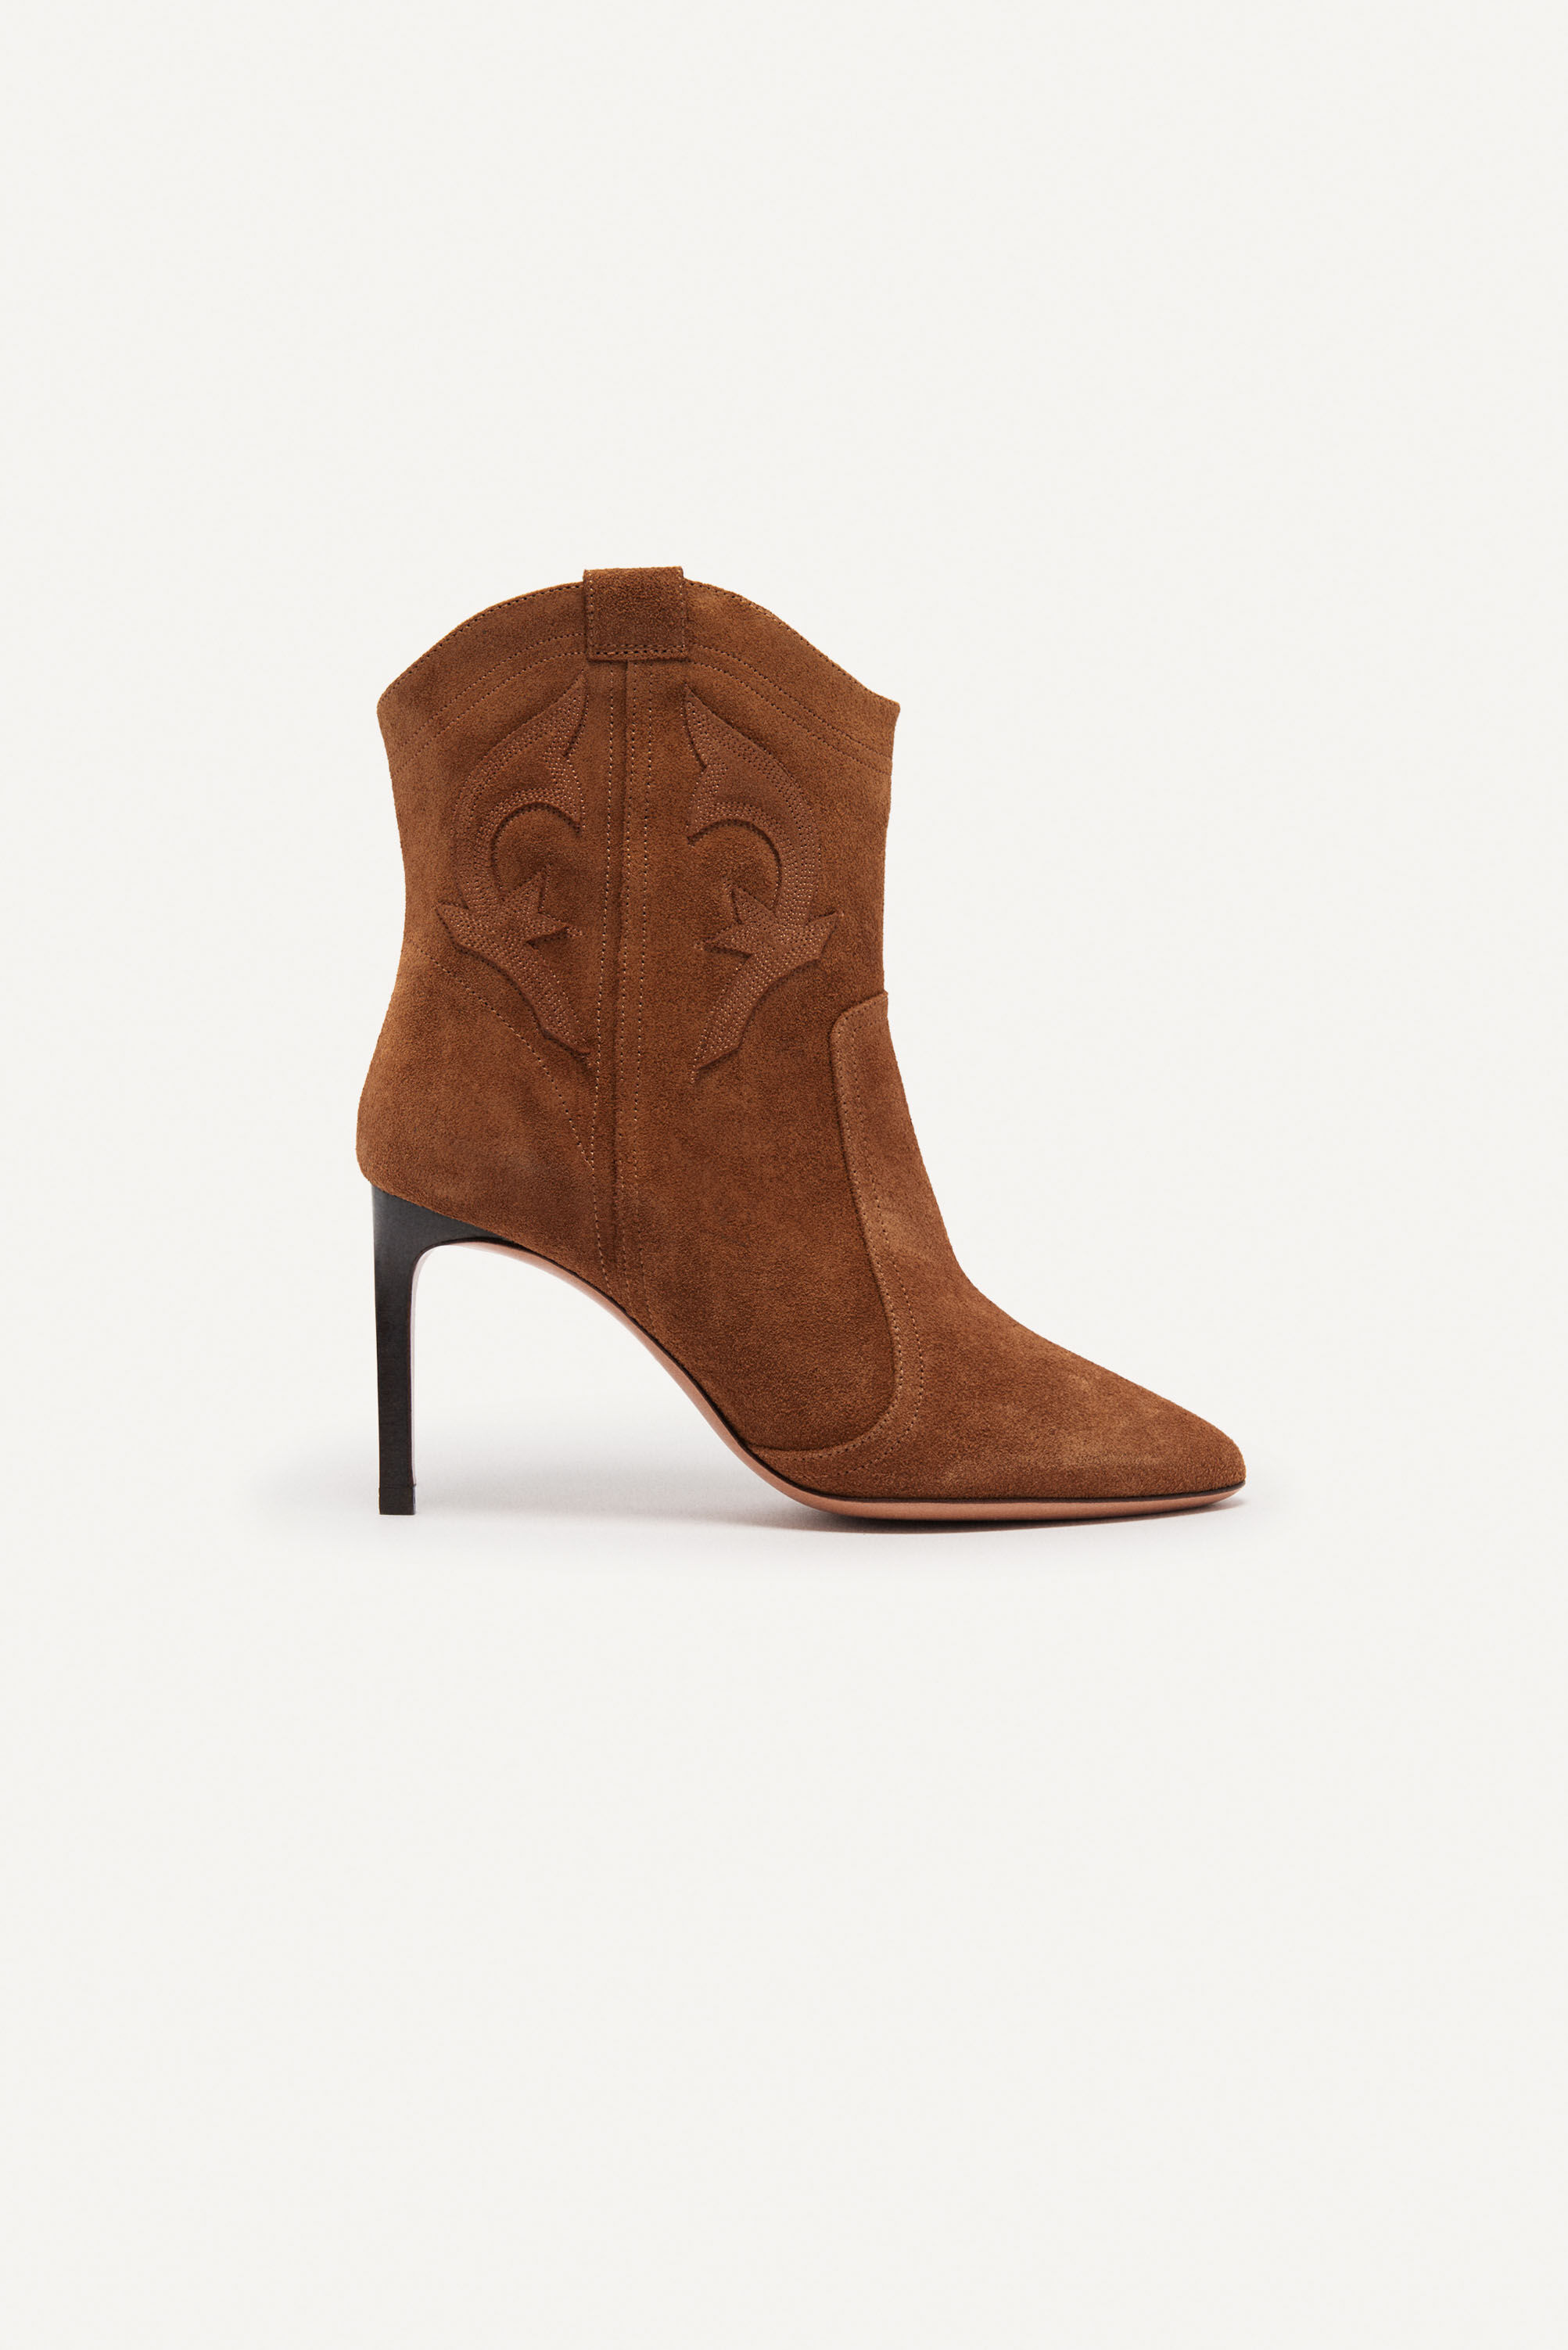 Womens High Heeled Boots | Leather & Ankle Boots | Next UK